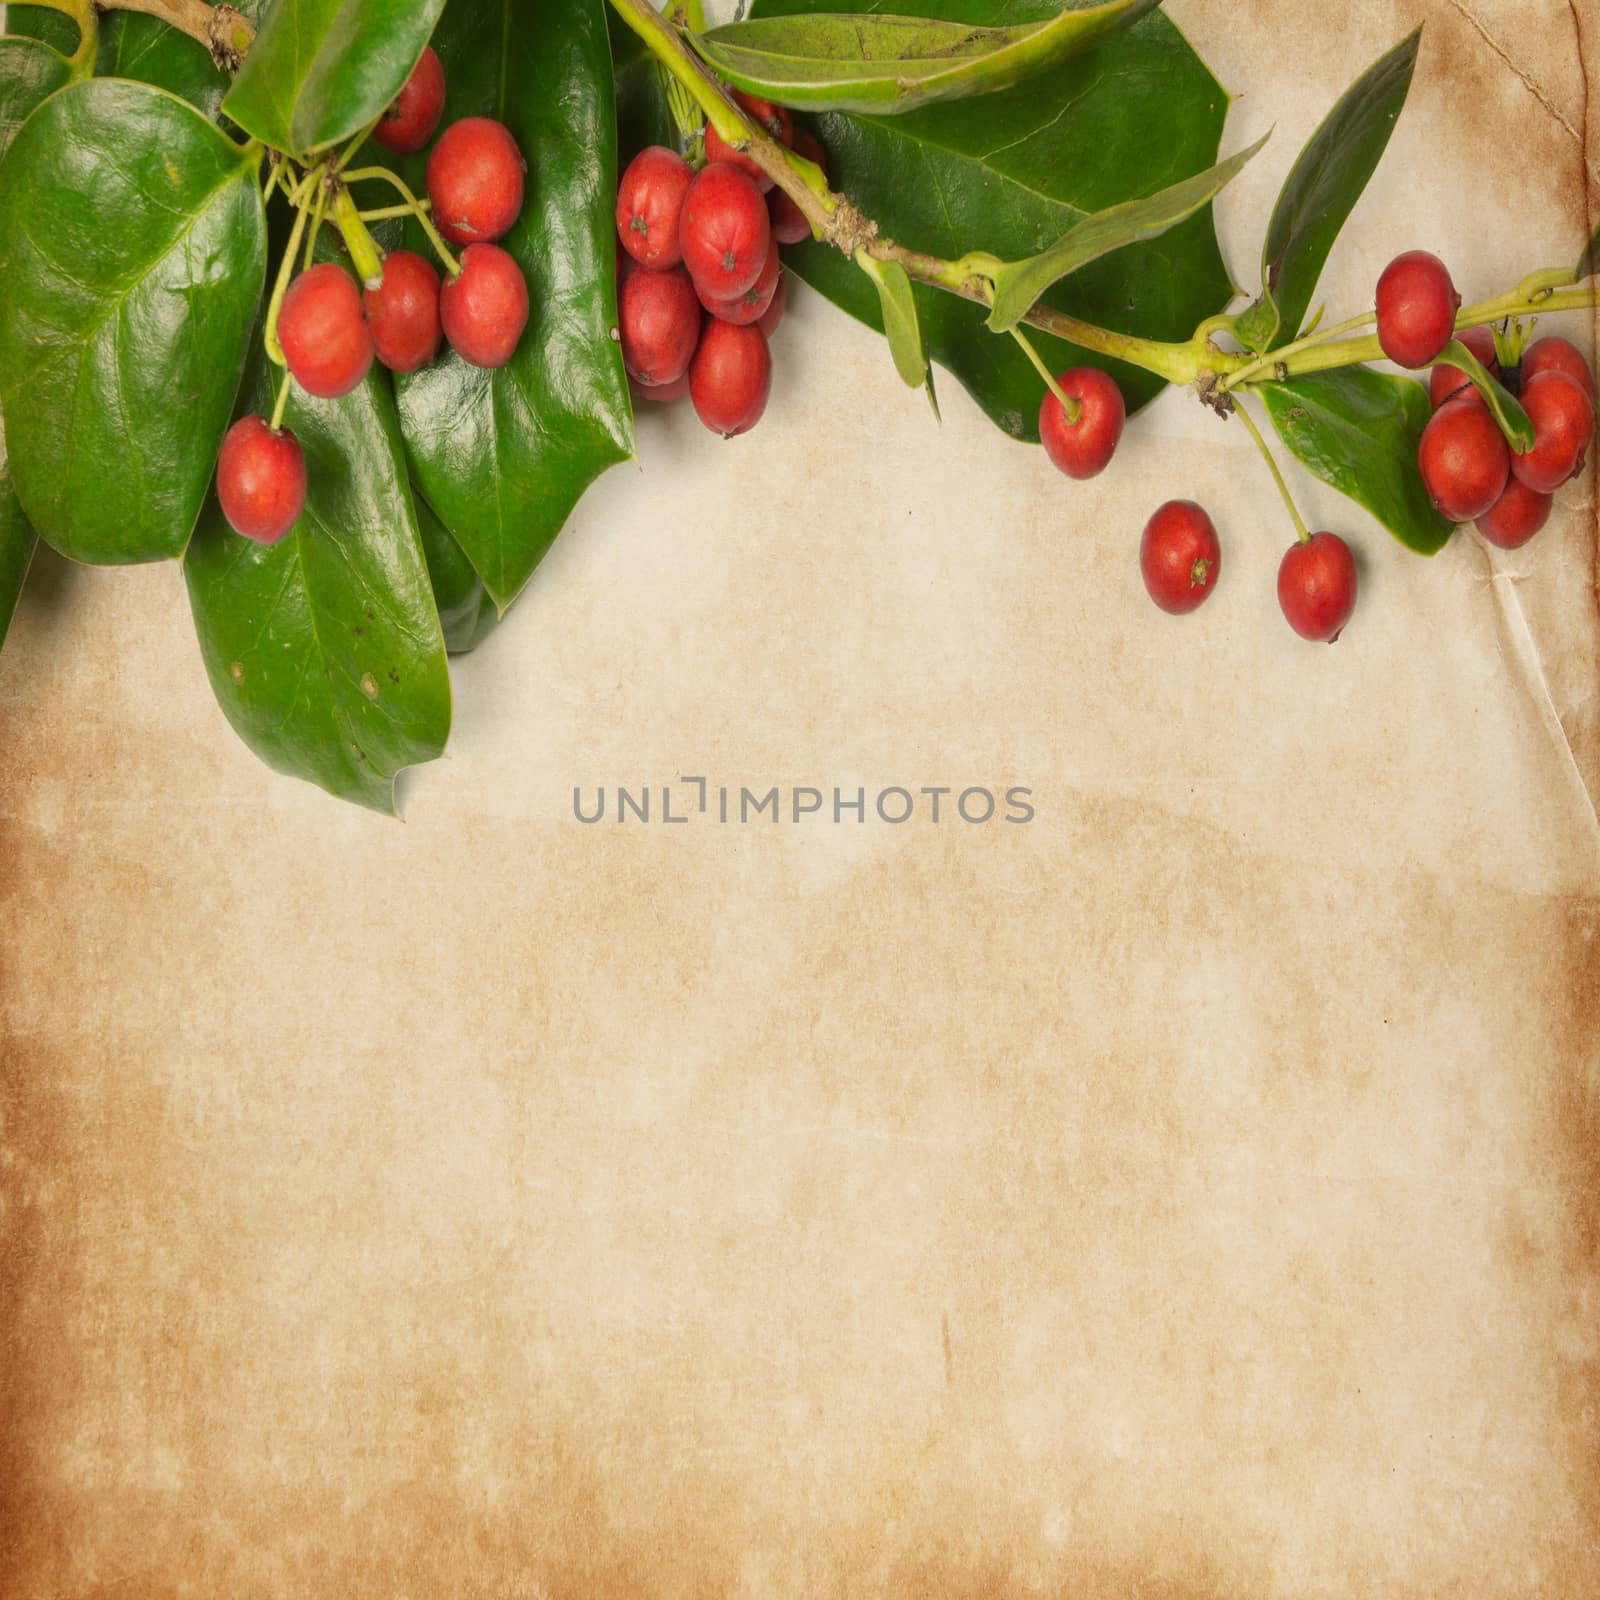 Holly Christmas vintage style grunge paper background